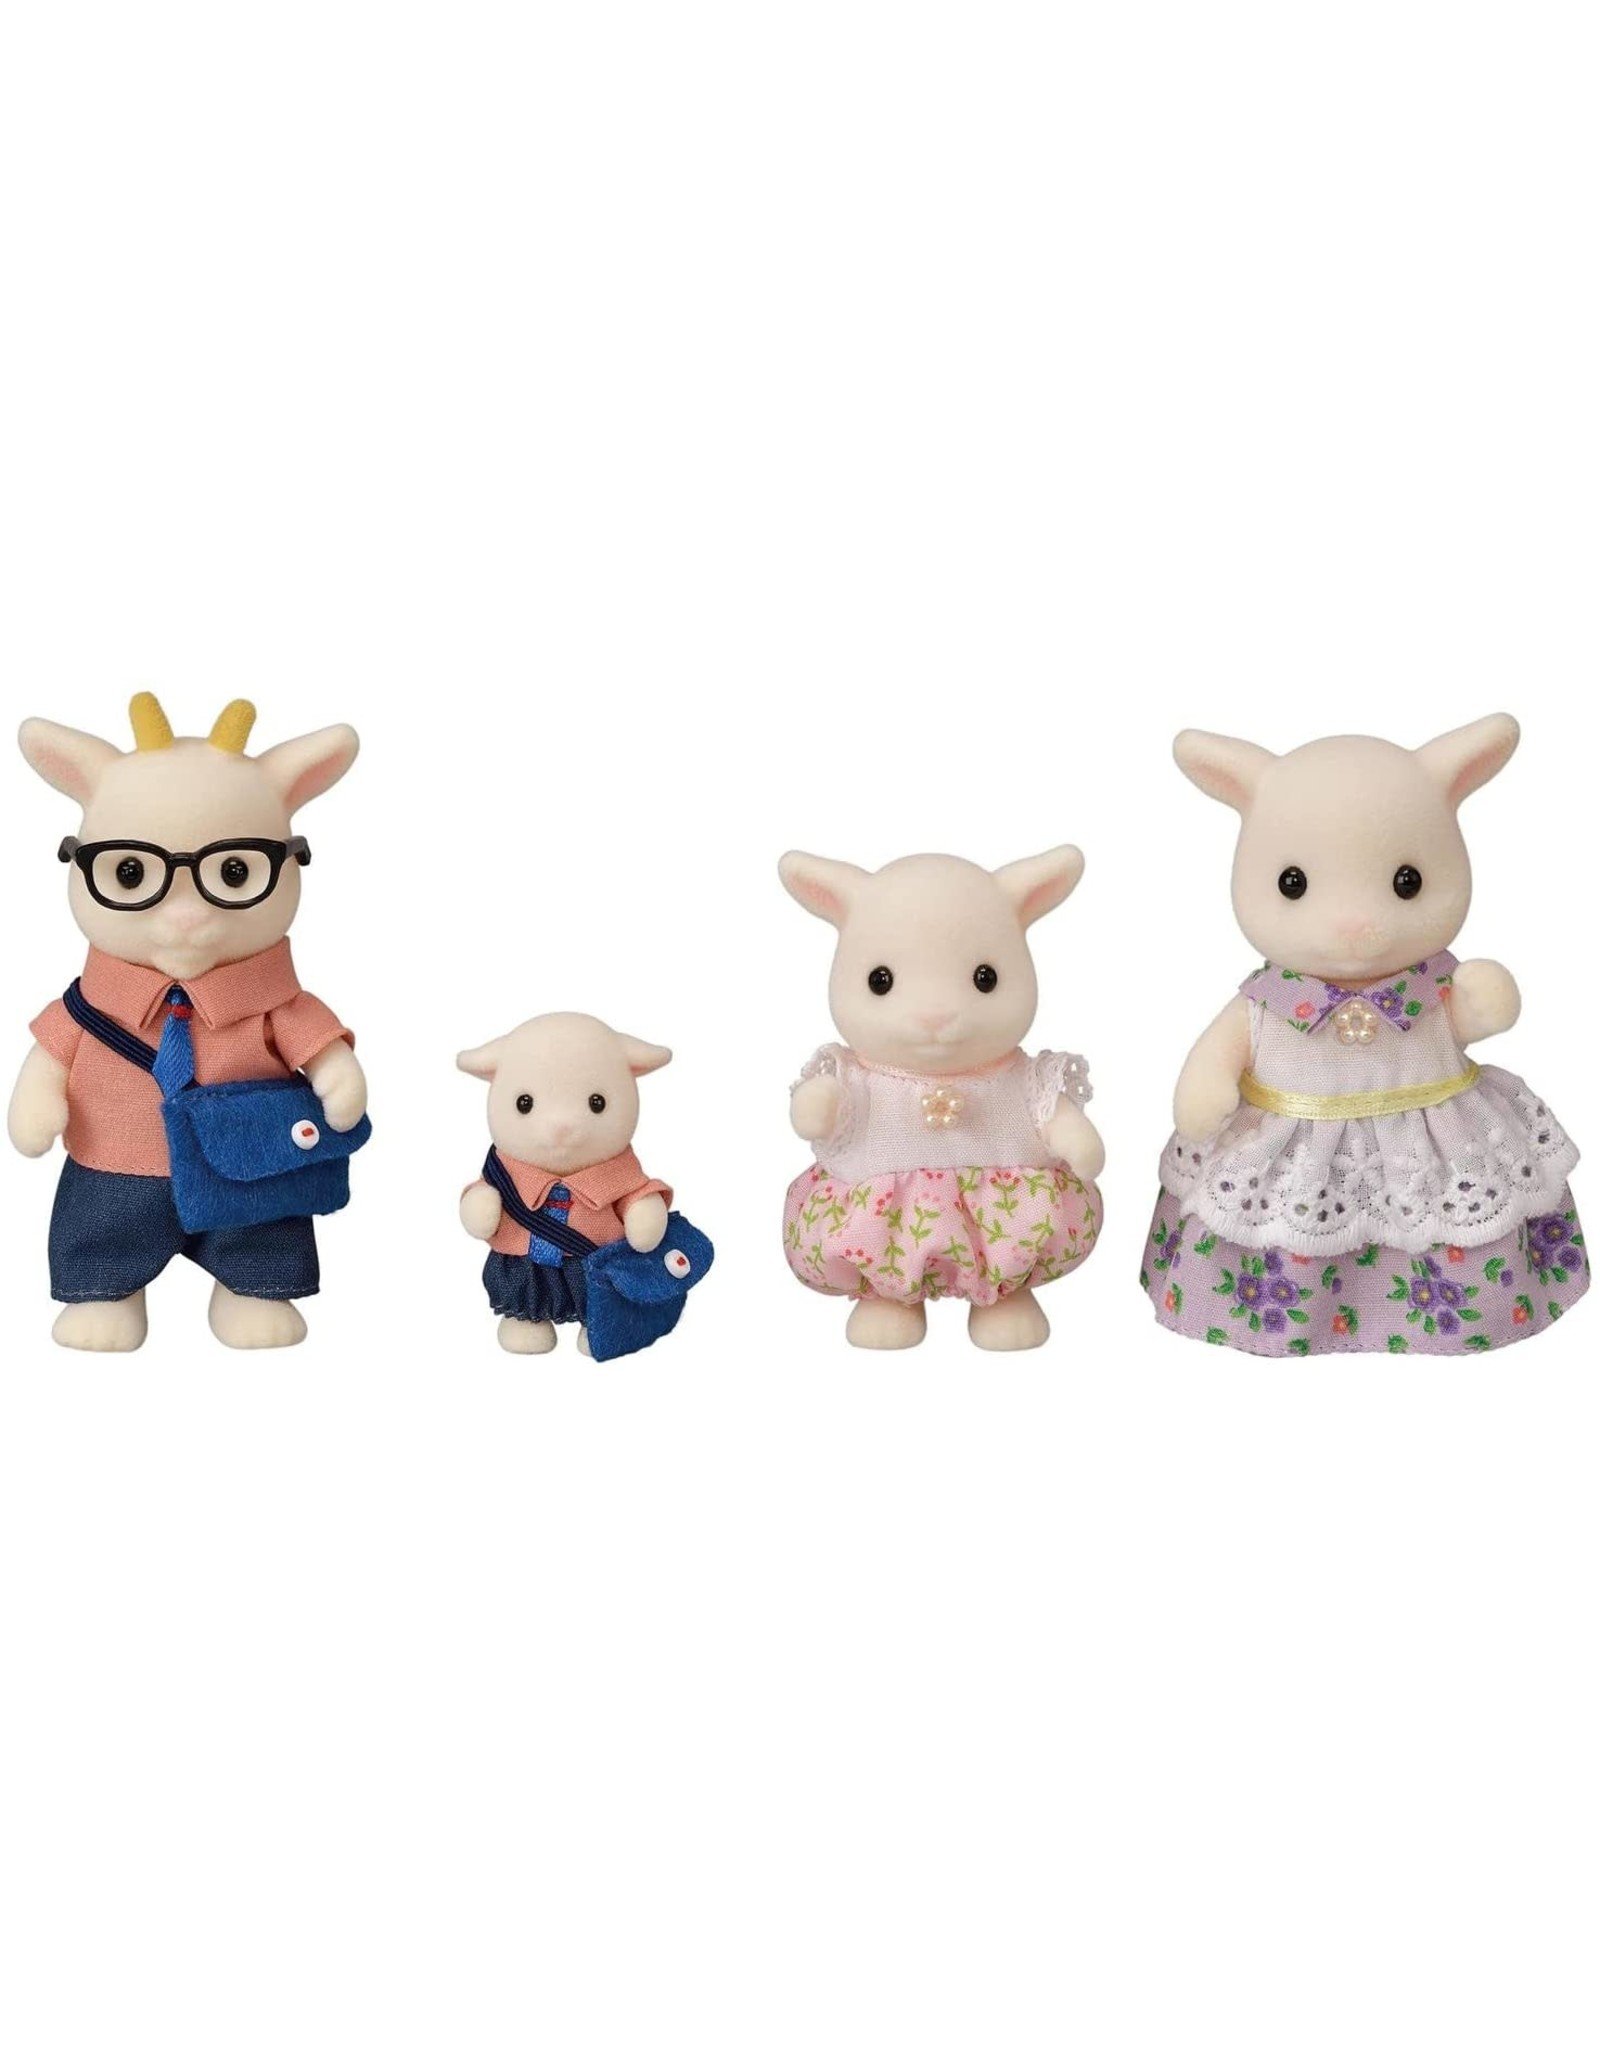 Calico Critters Calico Critters Goat Family